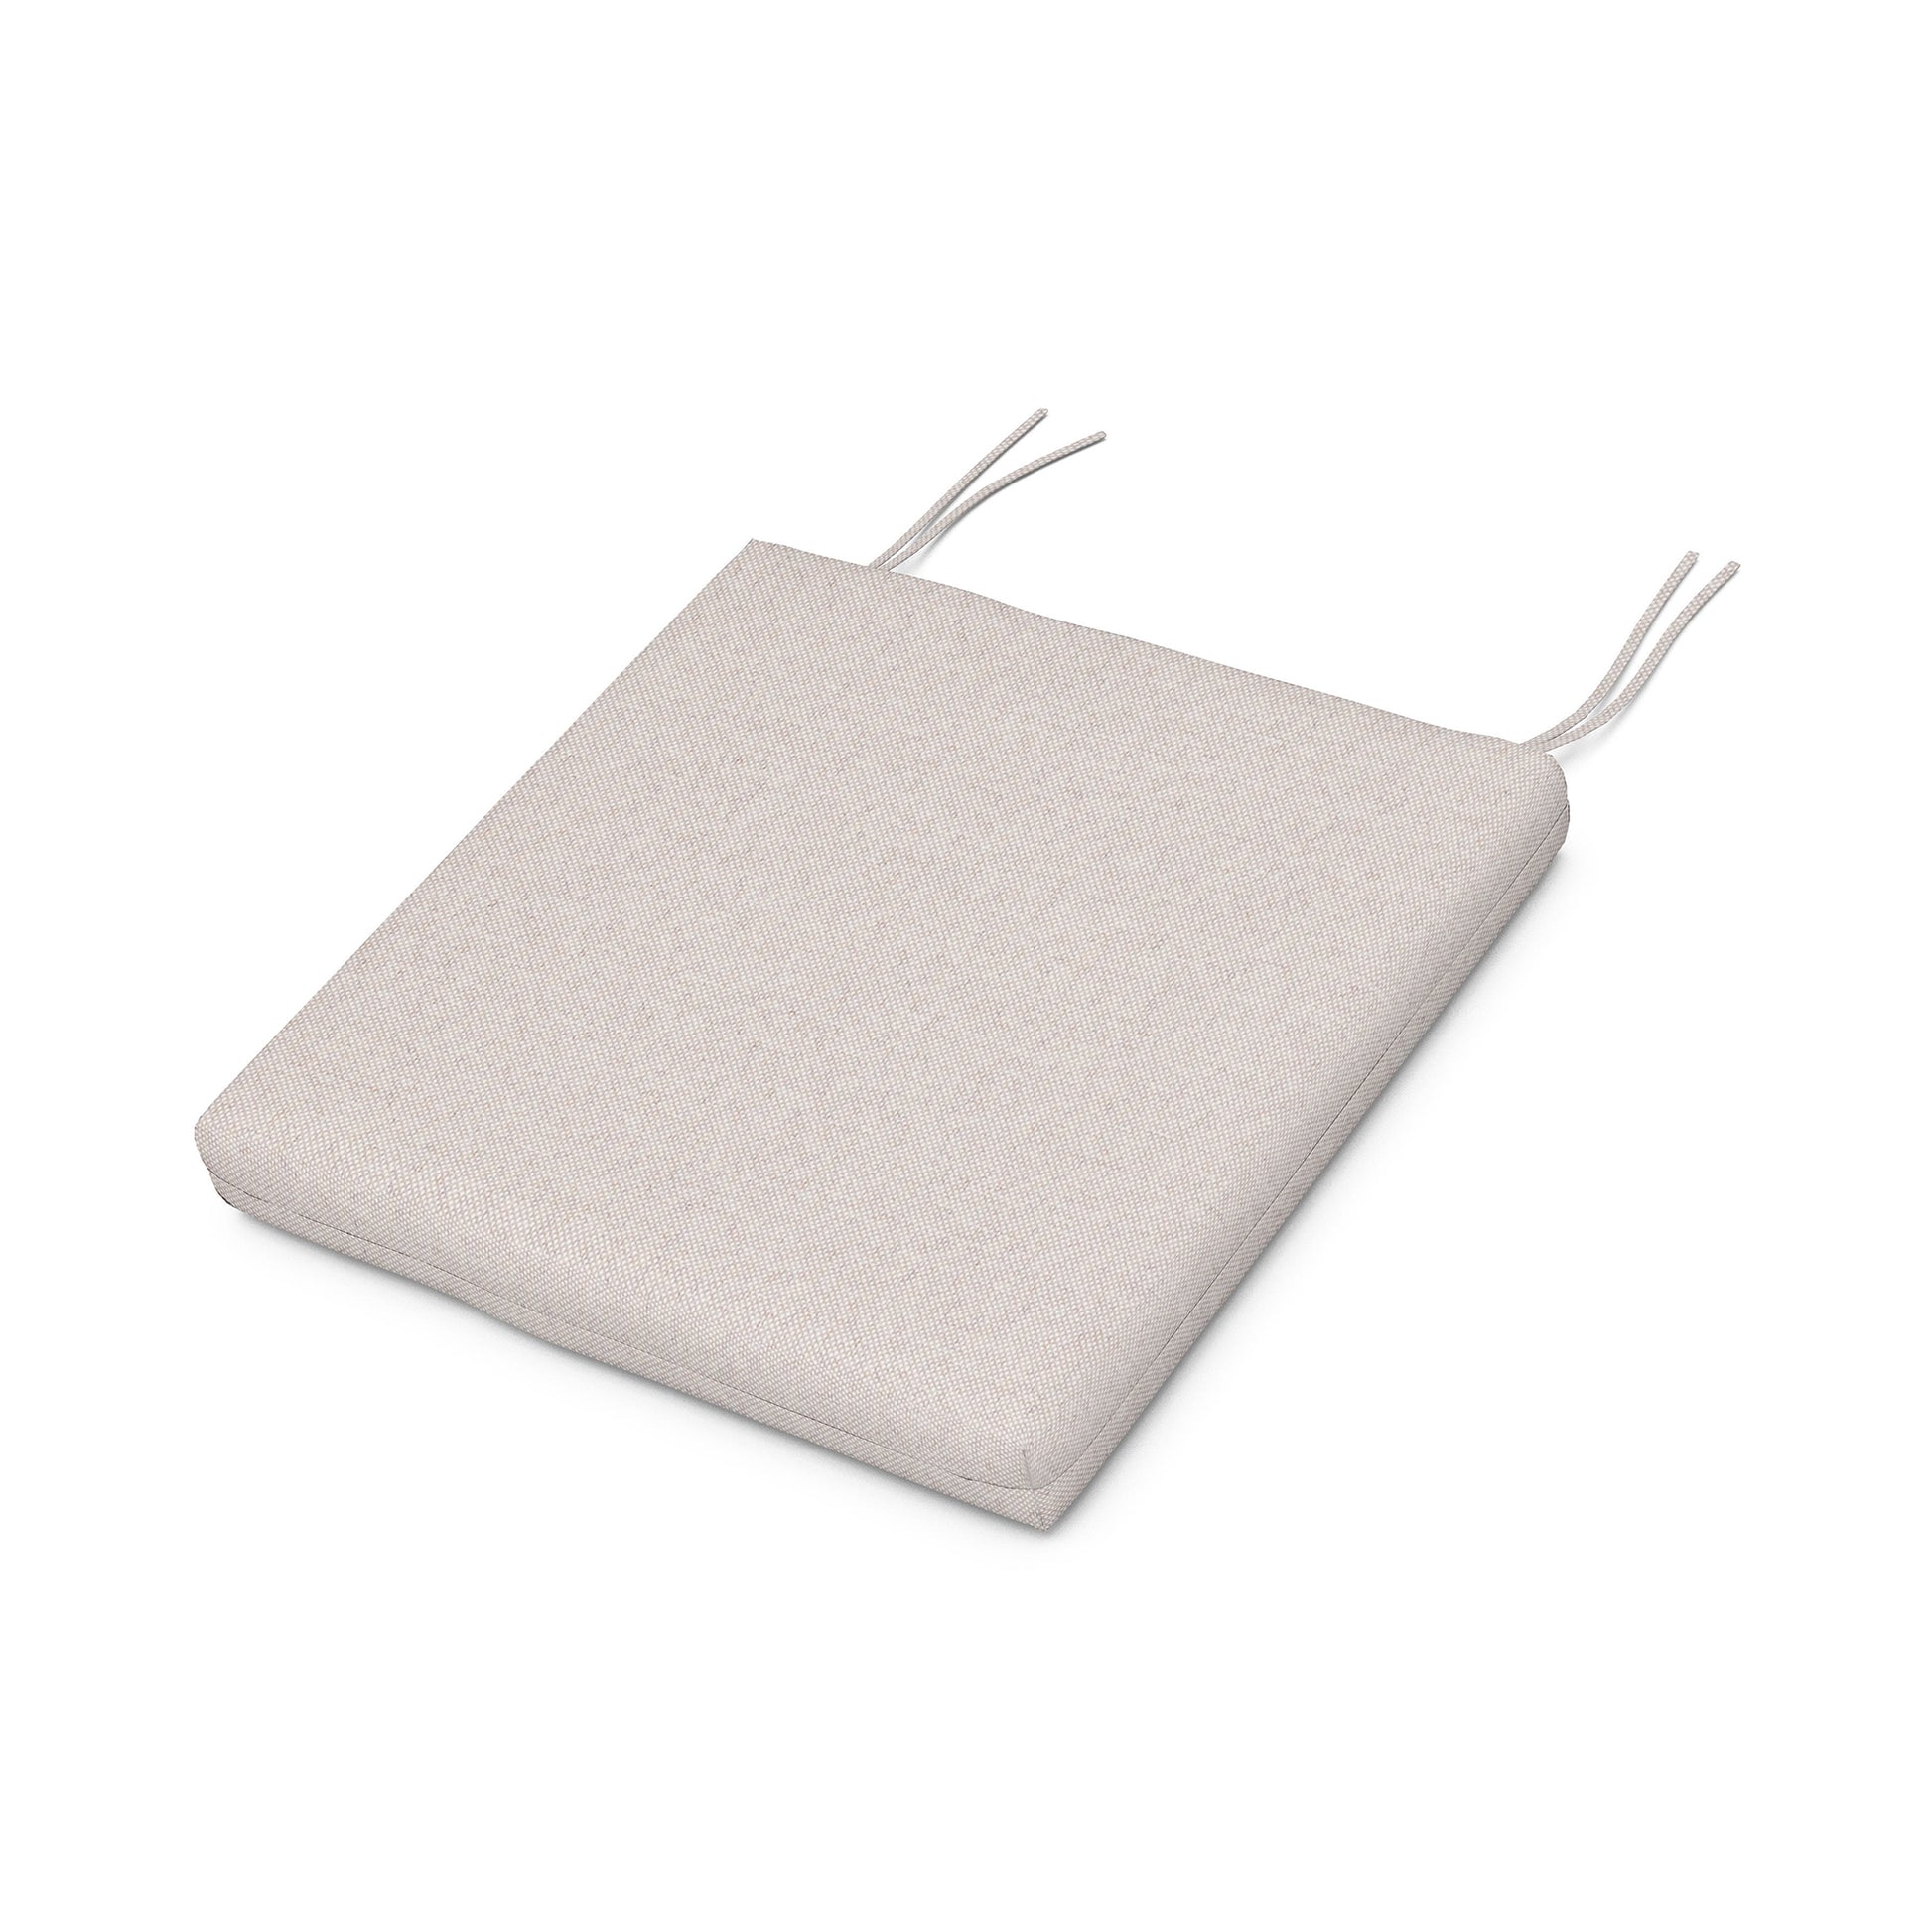 A weather-resistant beige square cushion with POLYWOOD XPWS0006 - Seat Cushion cushions on a white background.